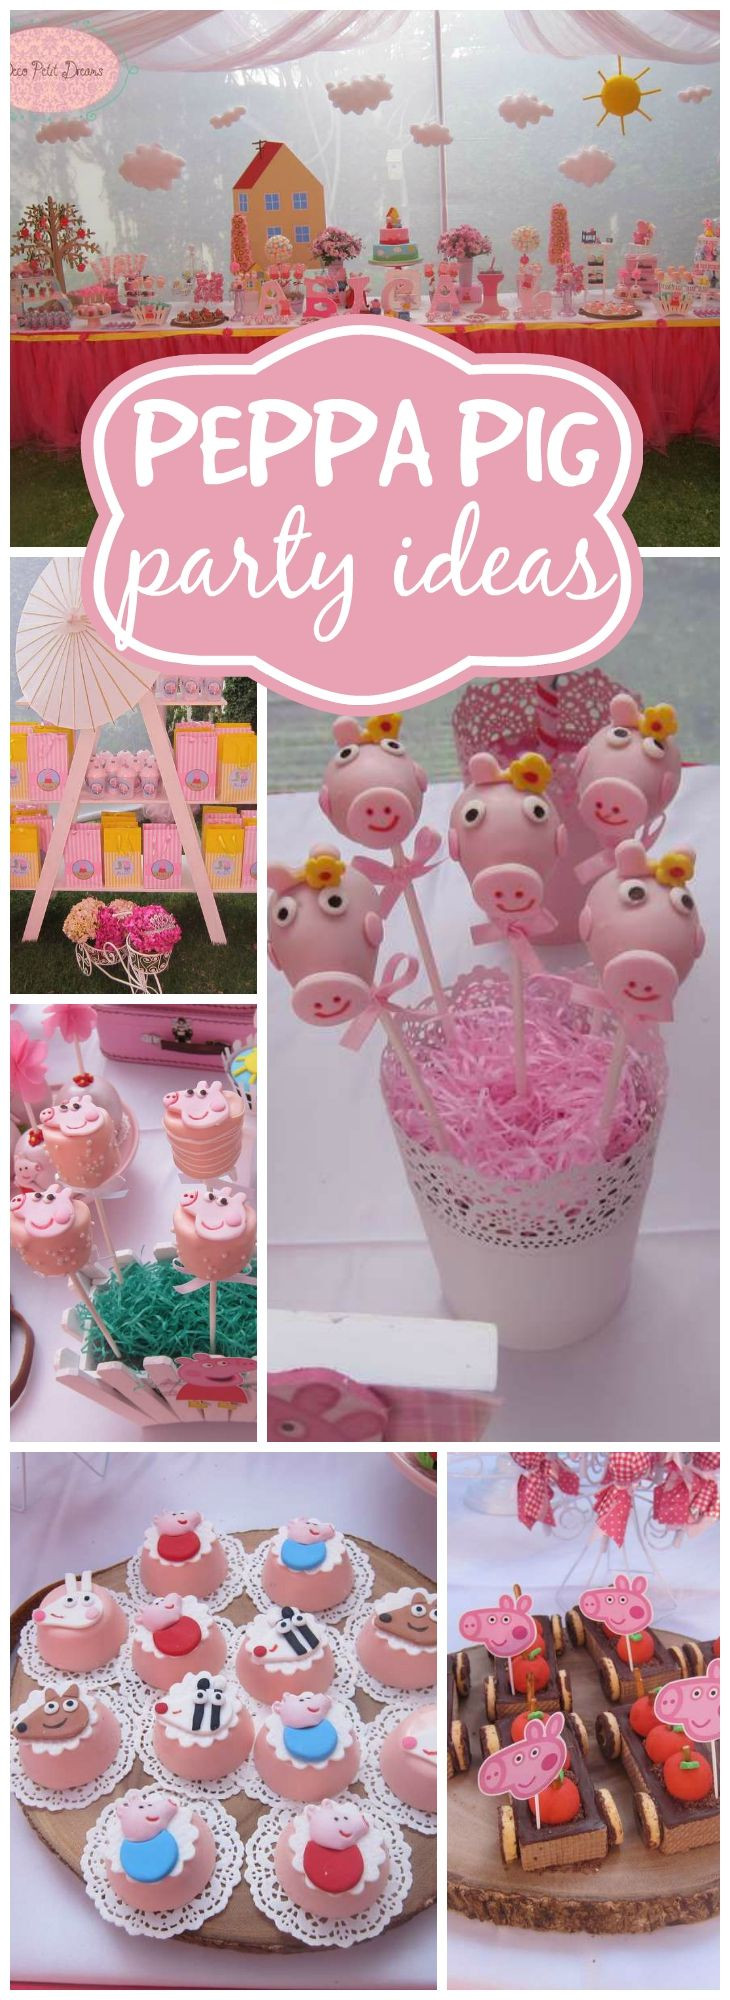 3Rd Birthday Party Ideas For Girl
 Peppa Pig Party Birthday "Peppa Pig 3rd Birthday